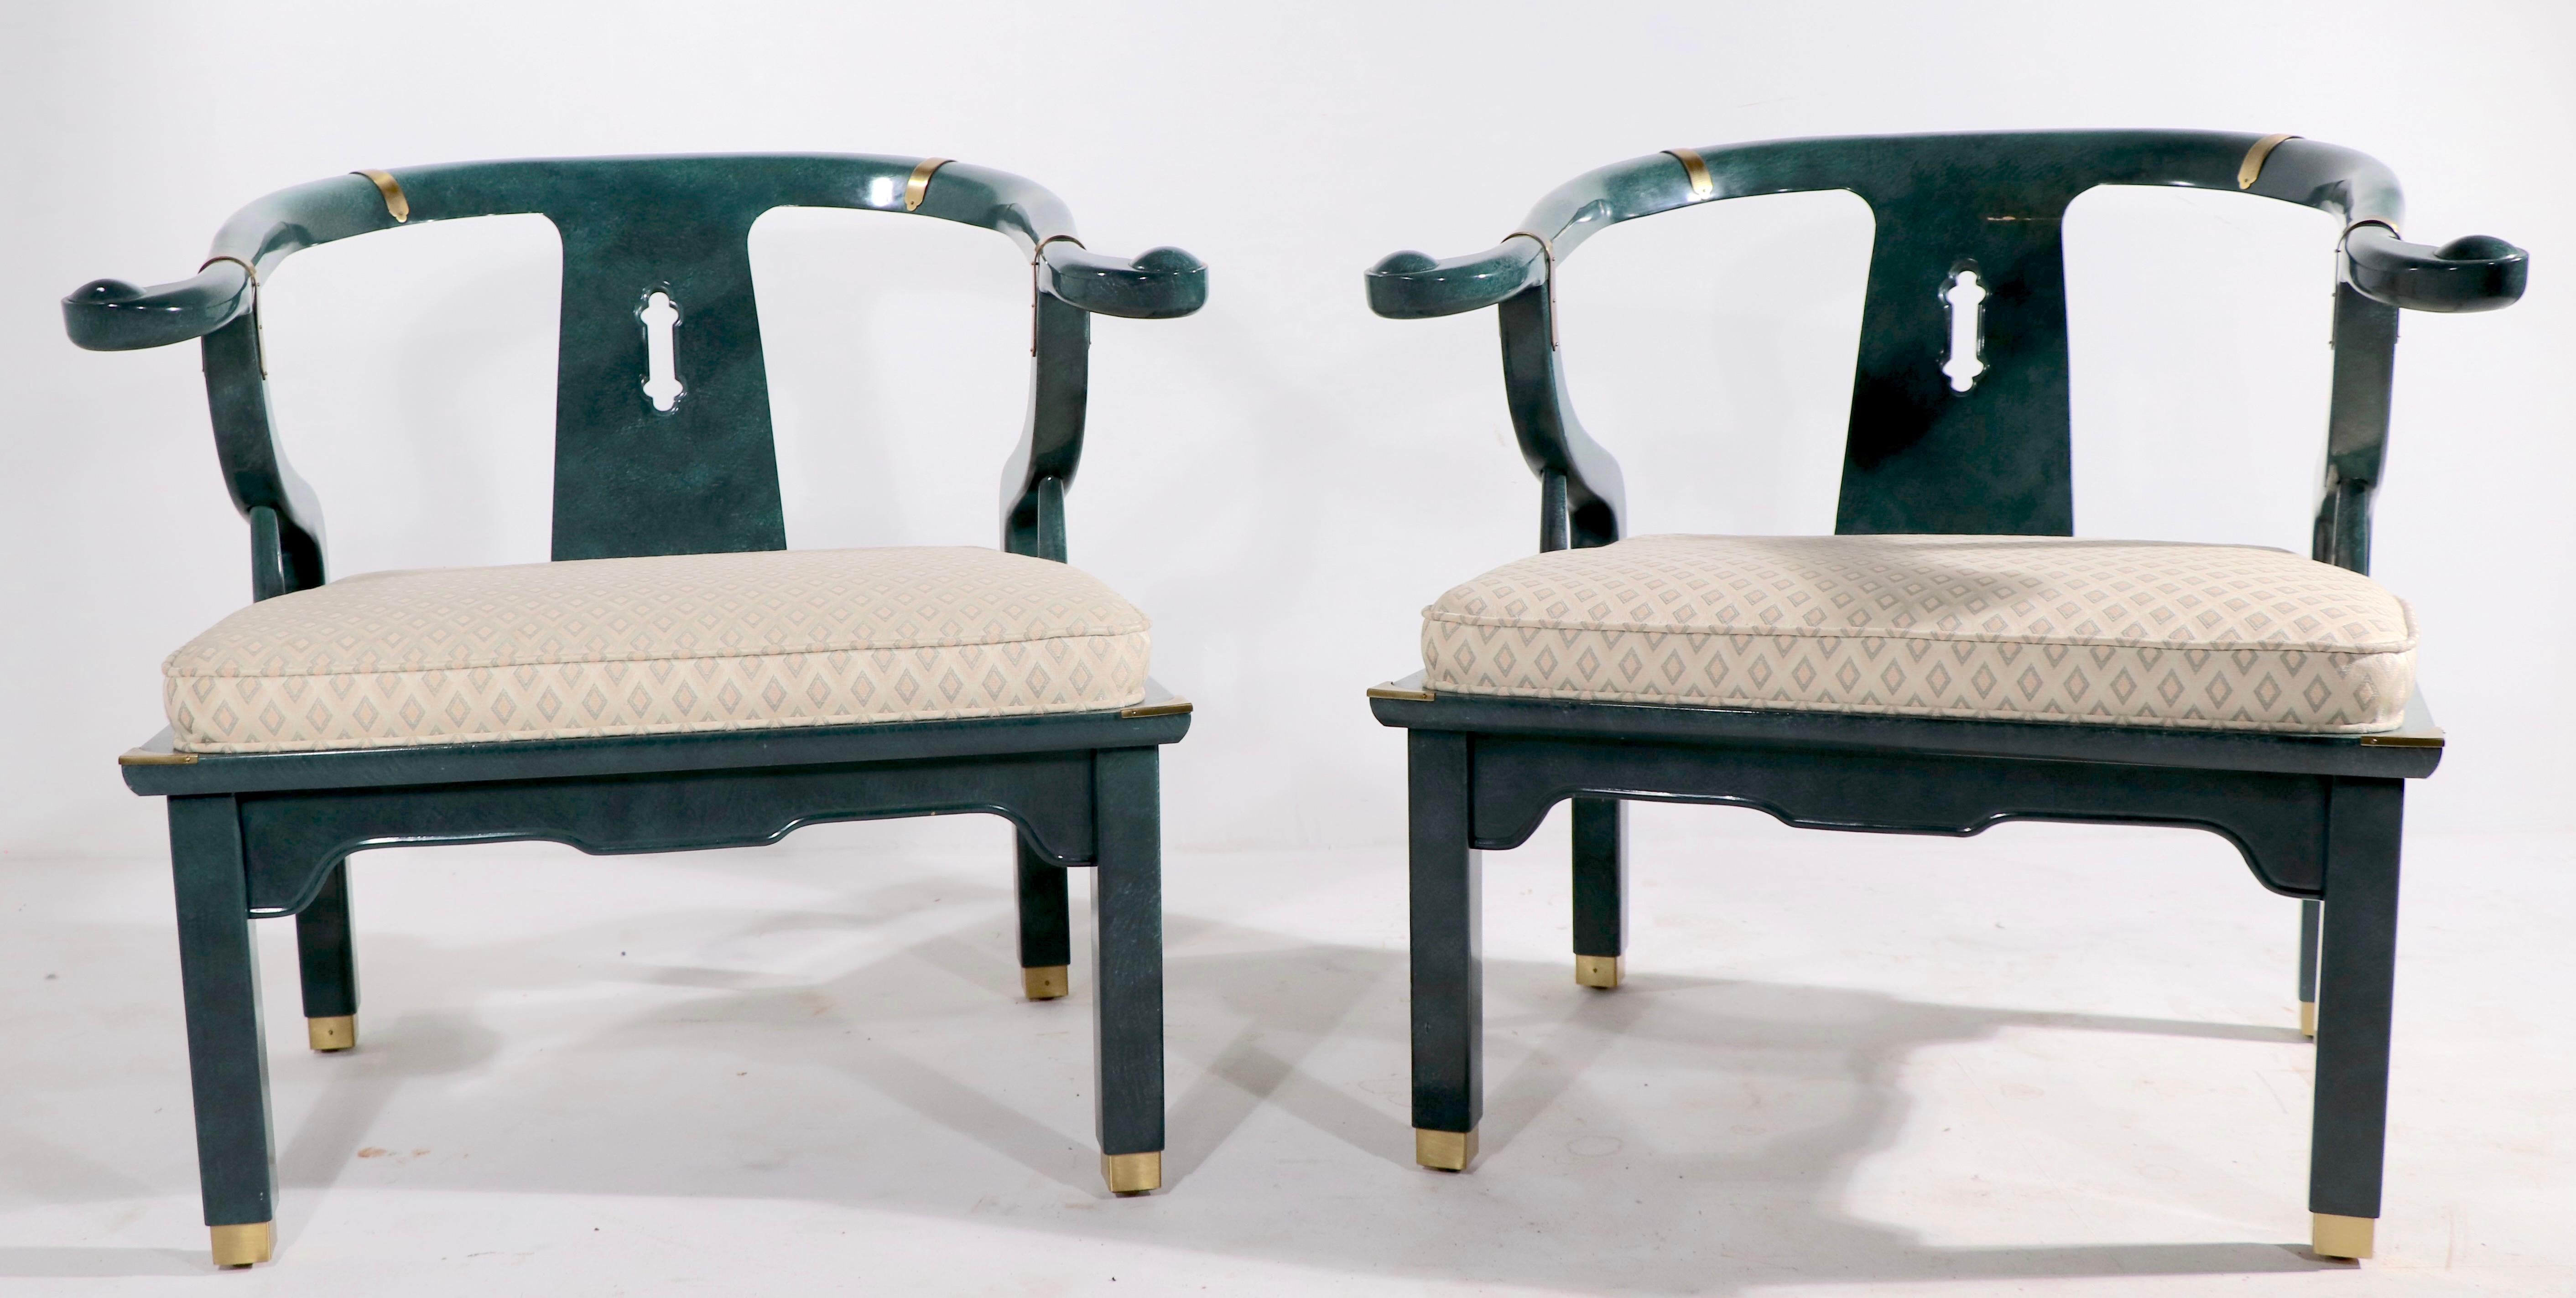 Pure voguish style pair of chairs in the Chinese, or Asia Modern style - executed in an unusual Jade faux finish. Both are in very good, original clean and ready to use condition - both show minor loss to the finish, please see images. The close up